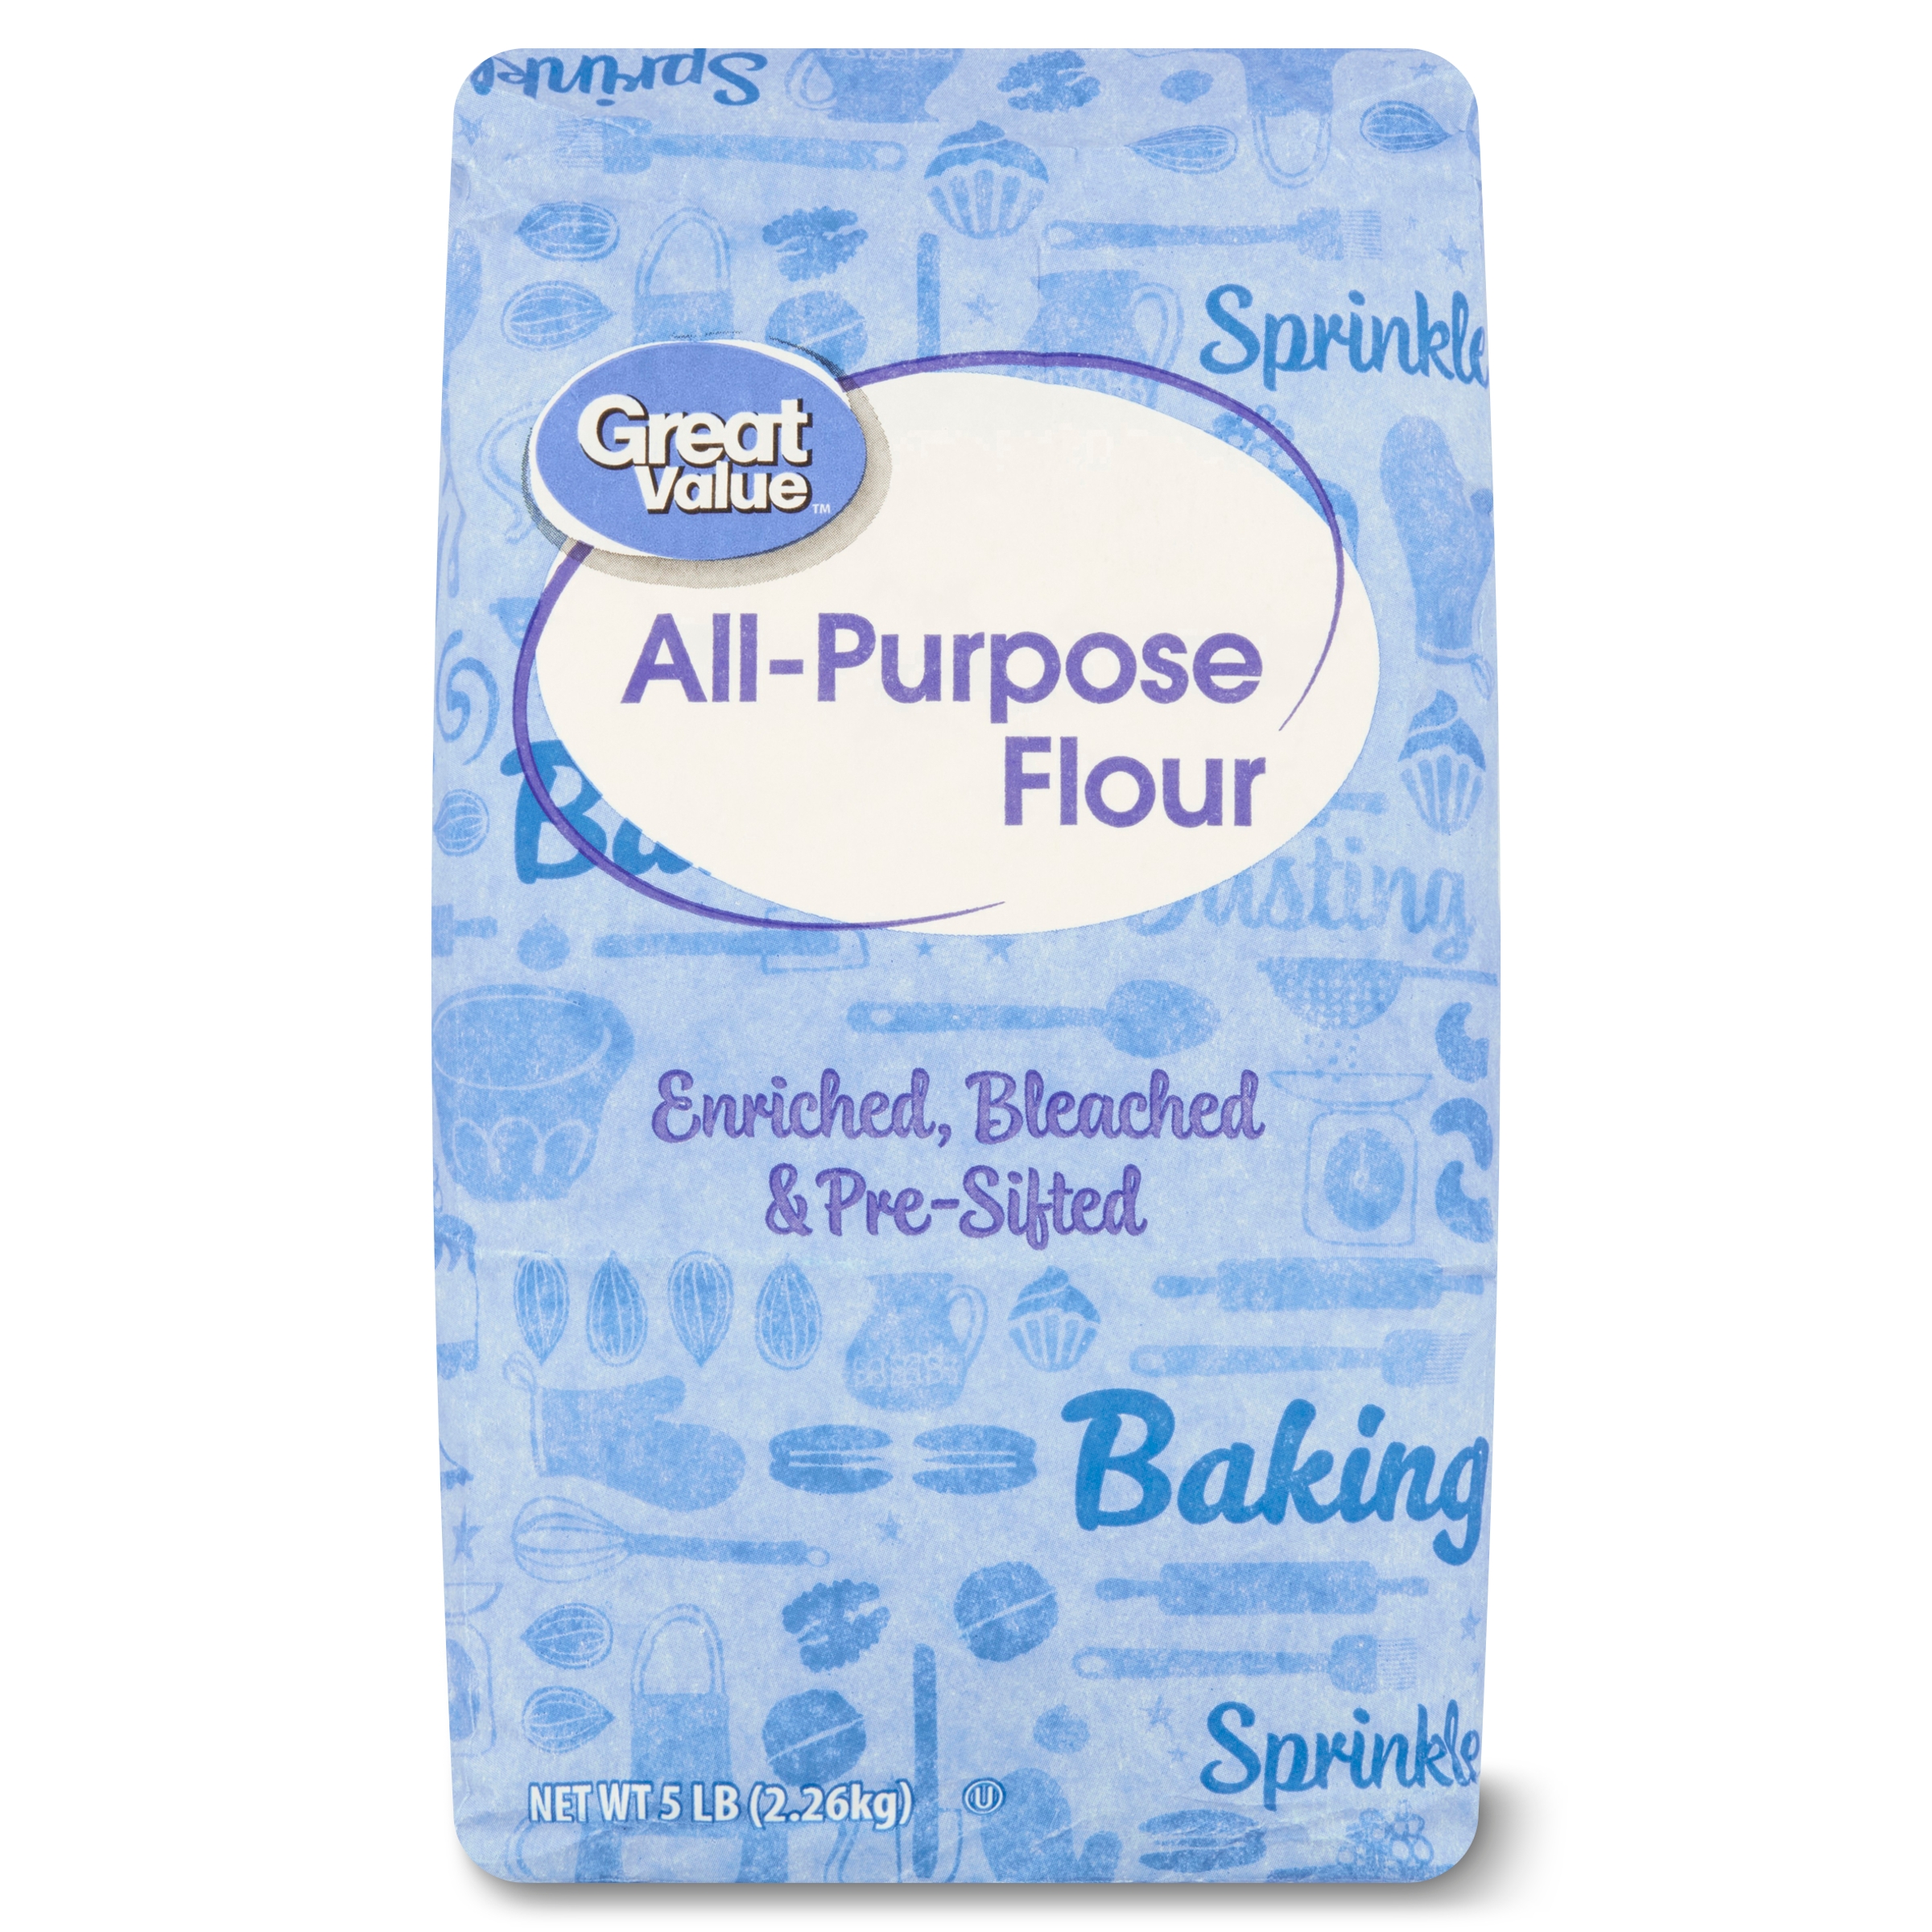 Great Value All-Purpose Enriched Flour, 5LB Bag - image 1 of 7